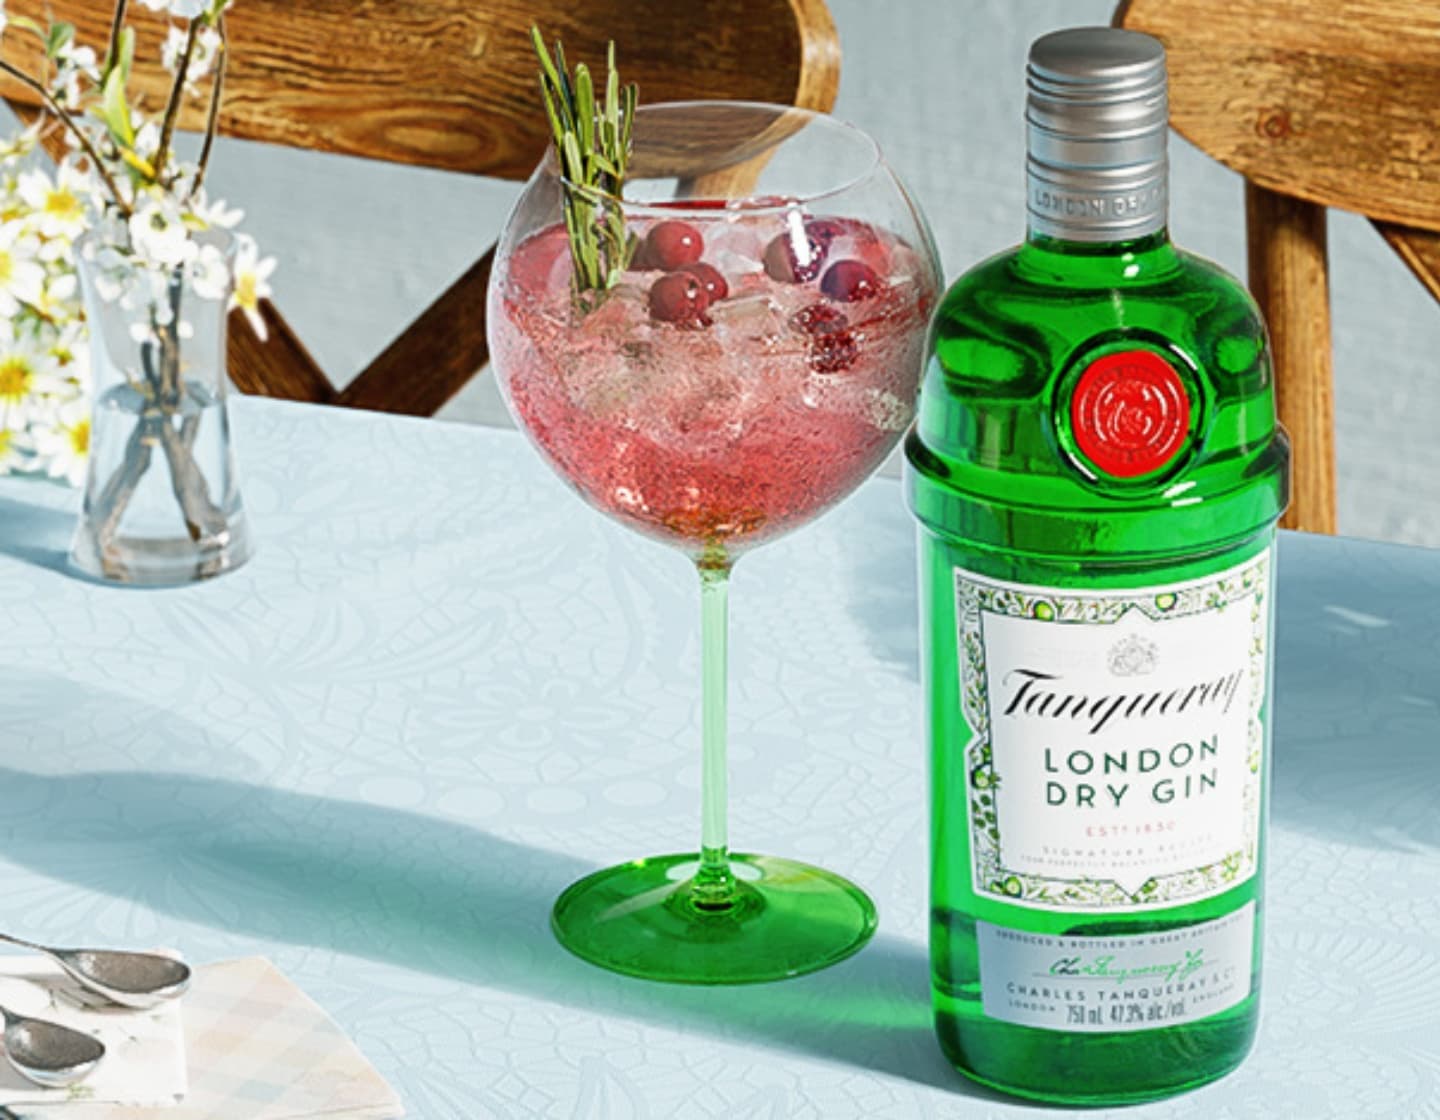 Tanqueray London Dry Gin bottle next to red cocktail with berries